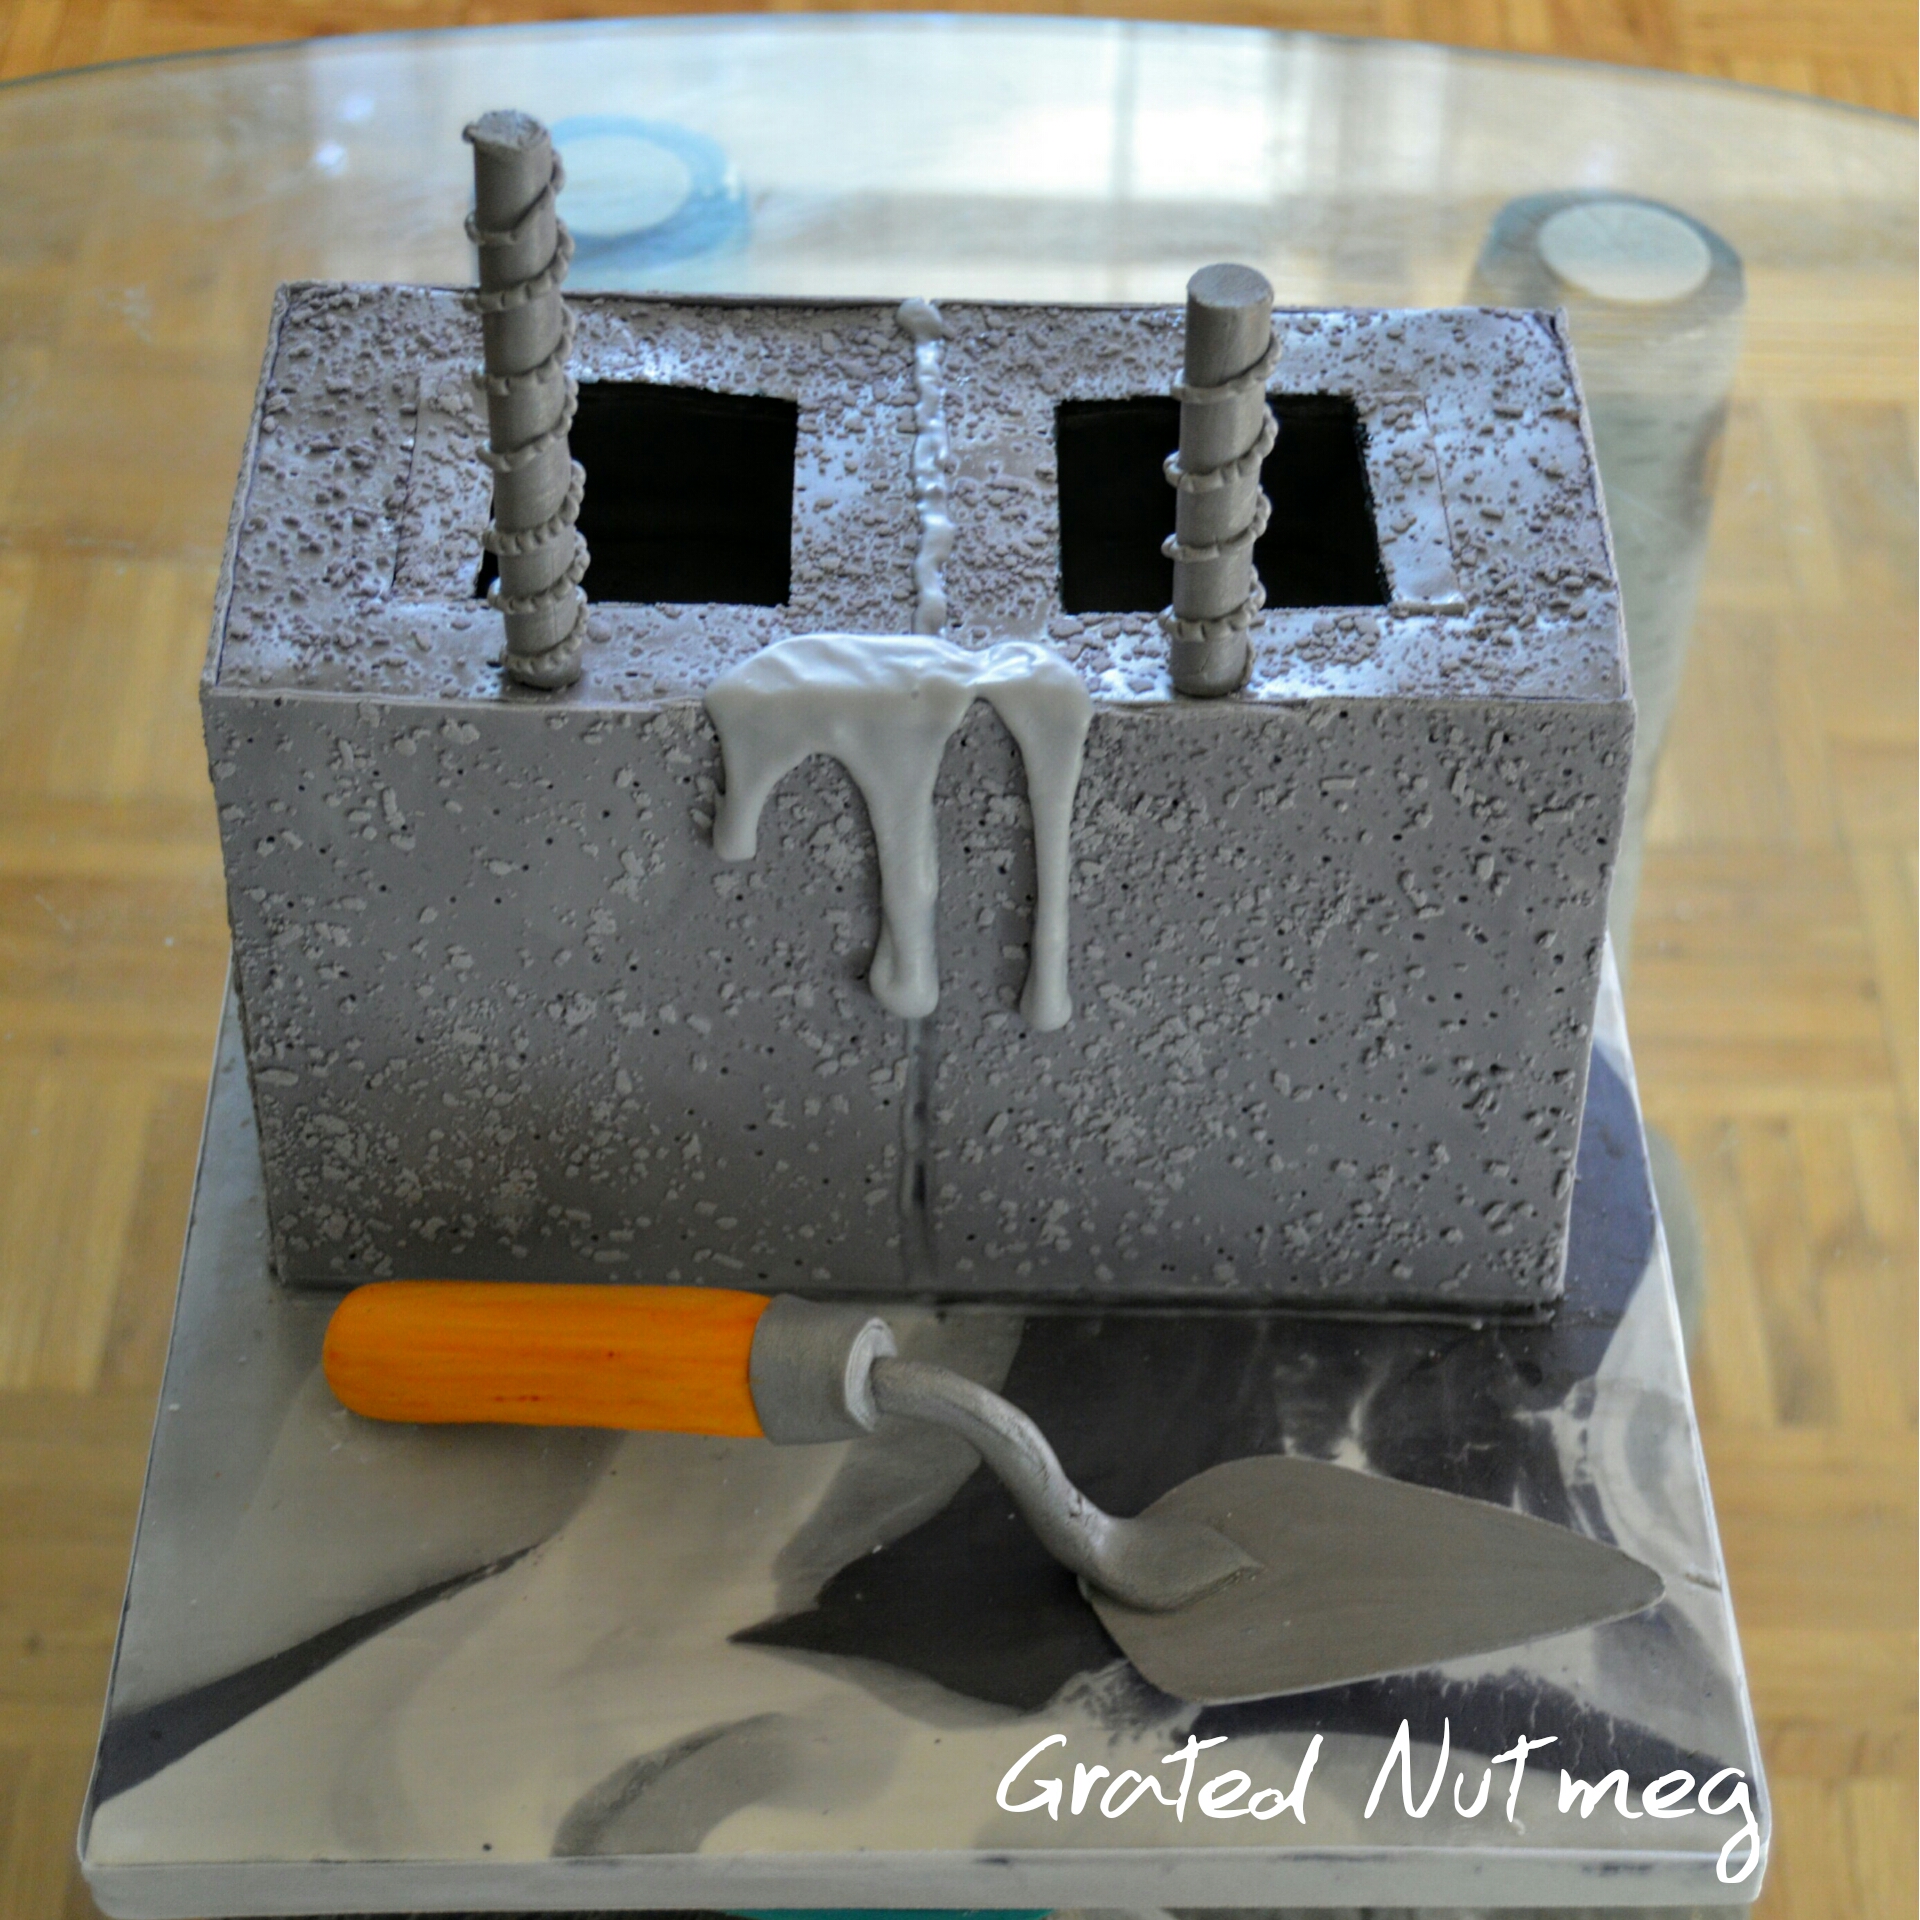 The Making of a Concrete Block Cake